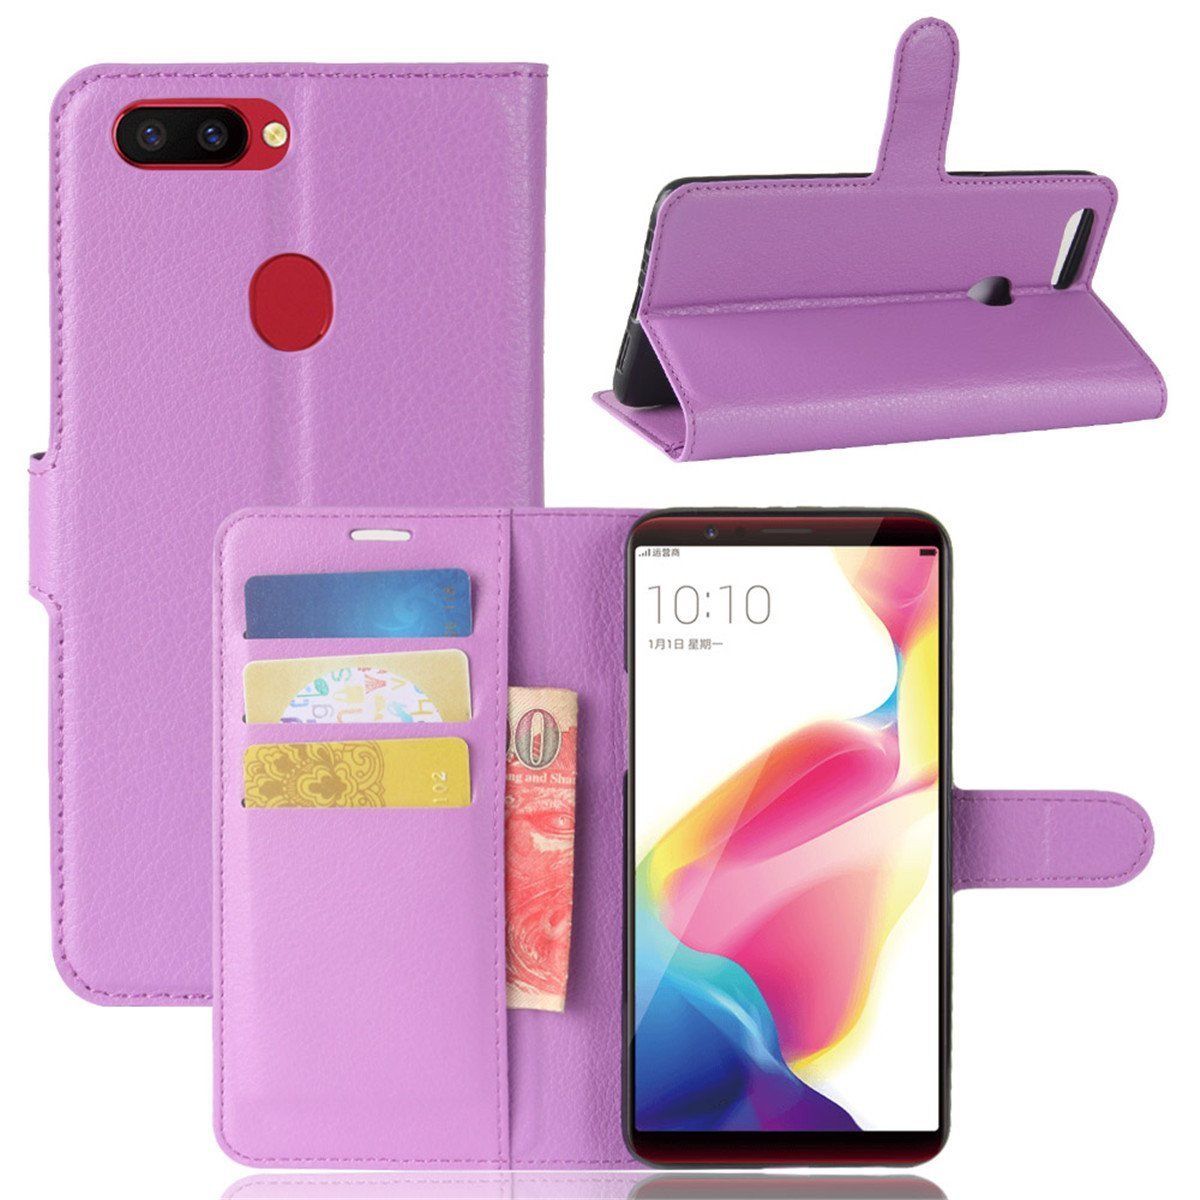 For Oppo A73/F5 Premium Leather Wallet Case Cover For Oppo Case-Purple